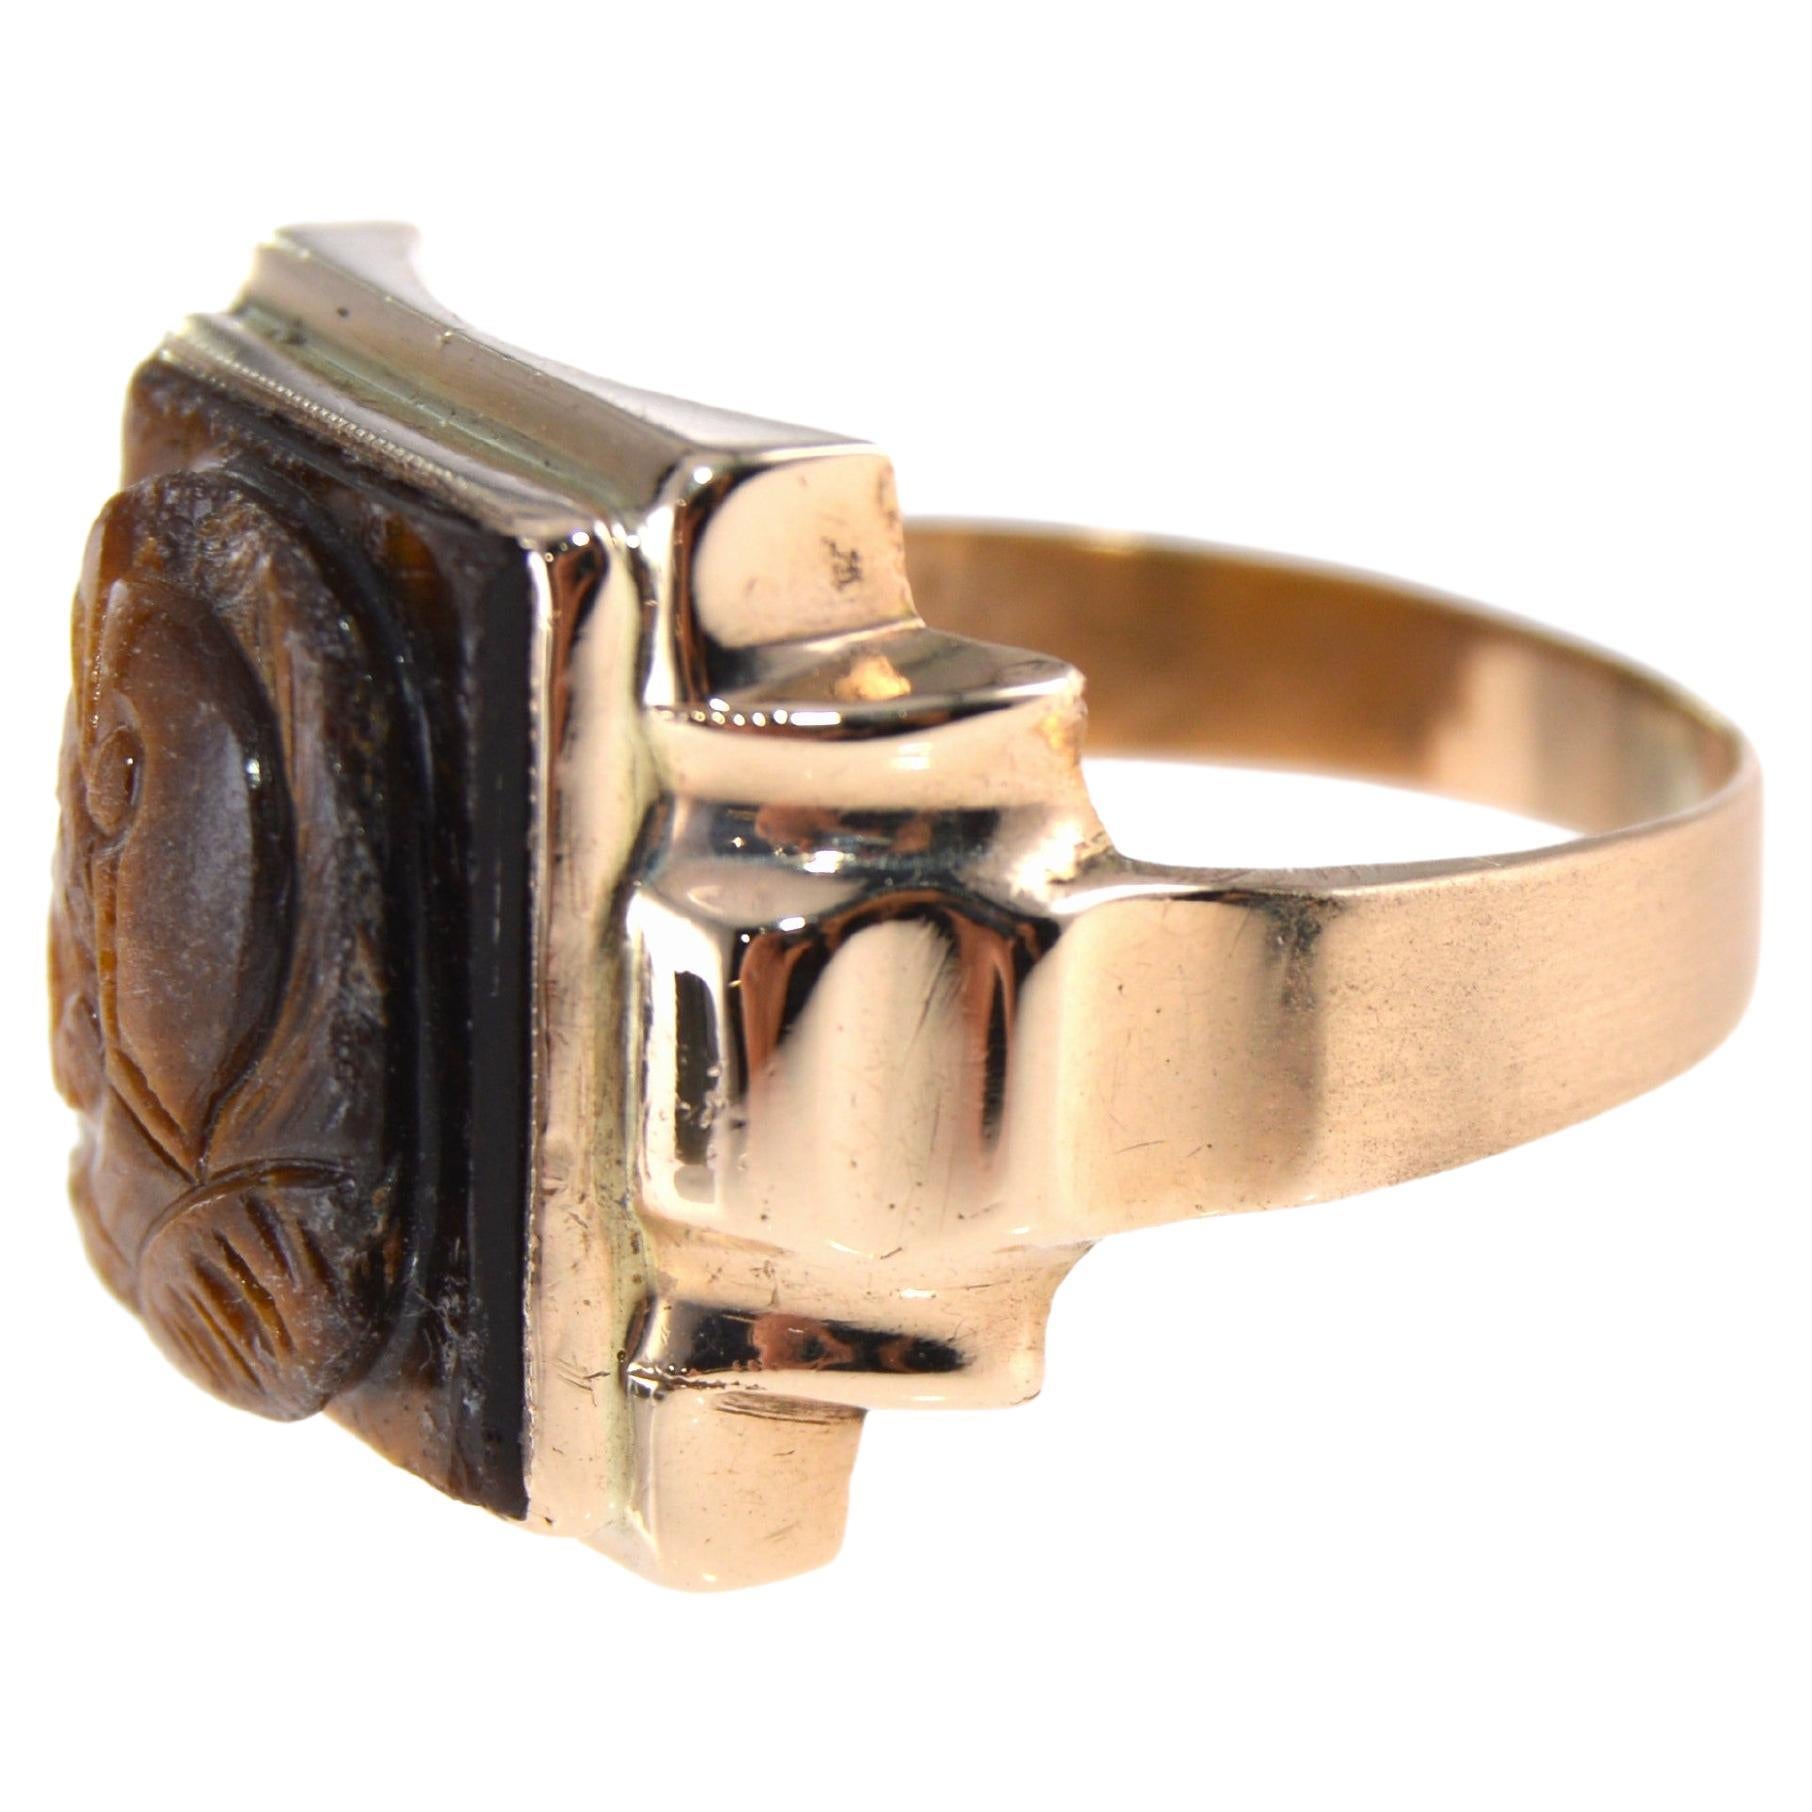 Unisex Art Deco 10kt. Solid Gold Tiger Eye Hand Constructed Ring from 1940s For Sale 4